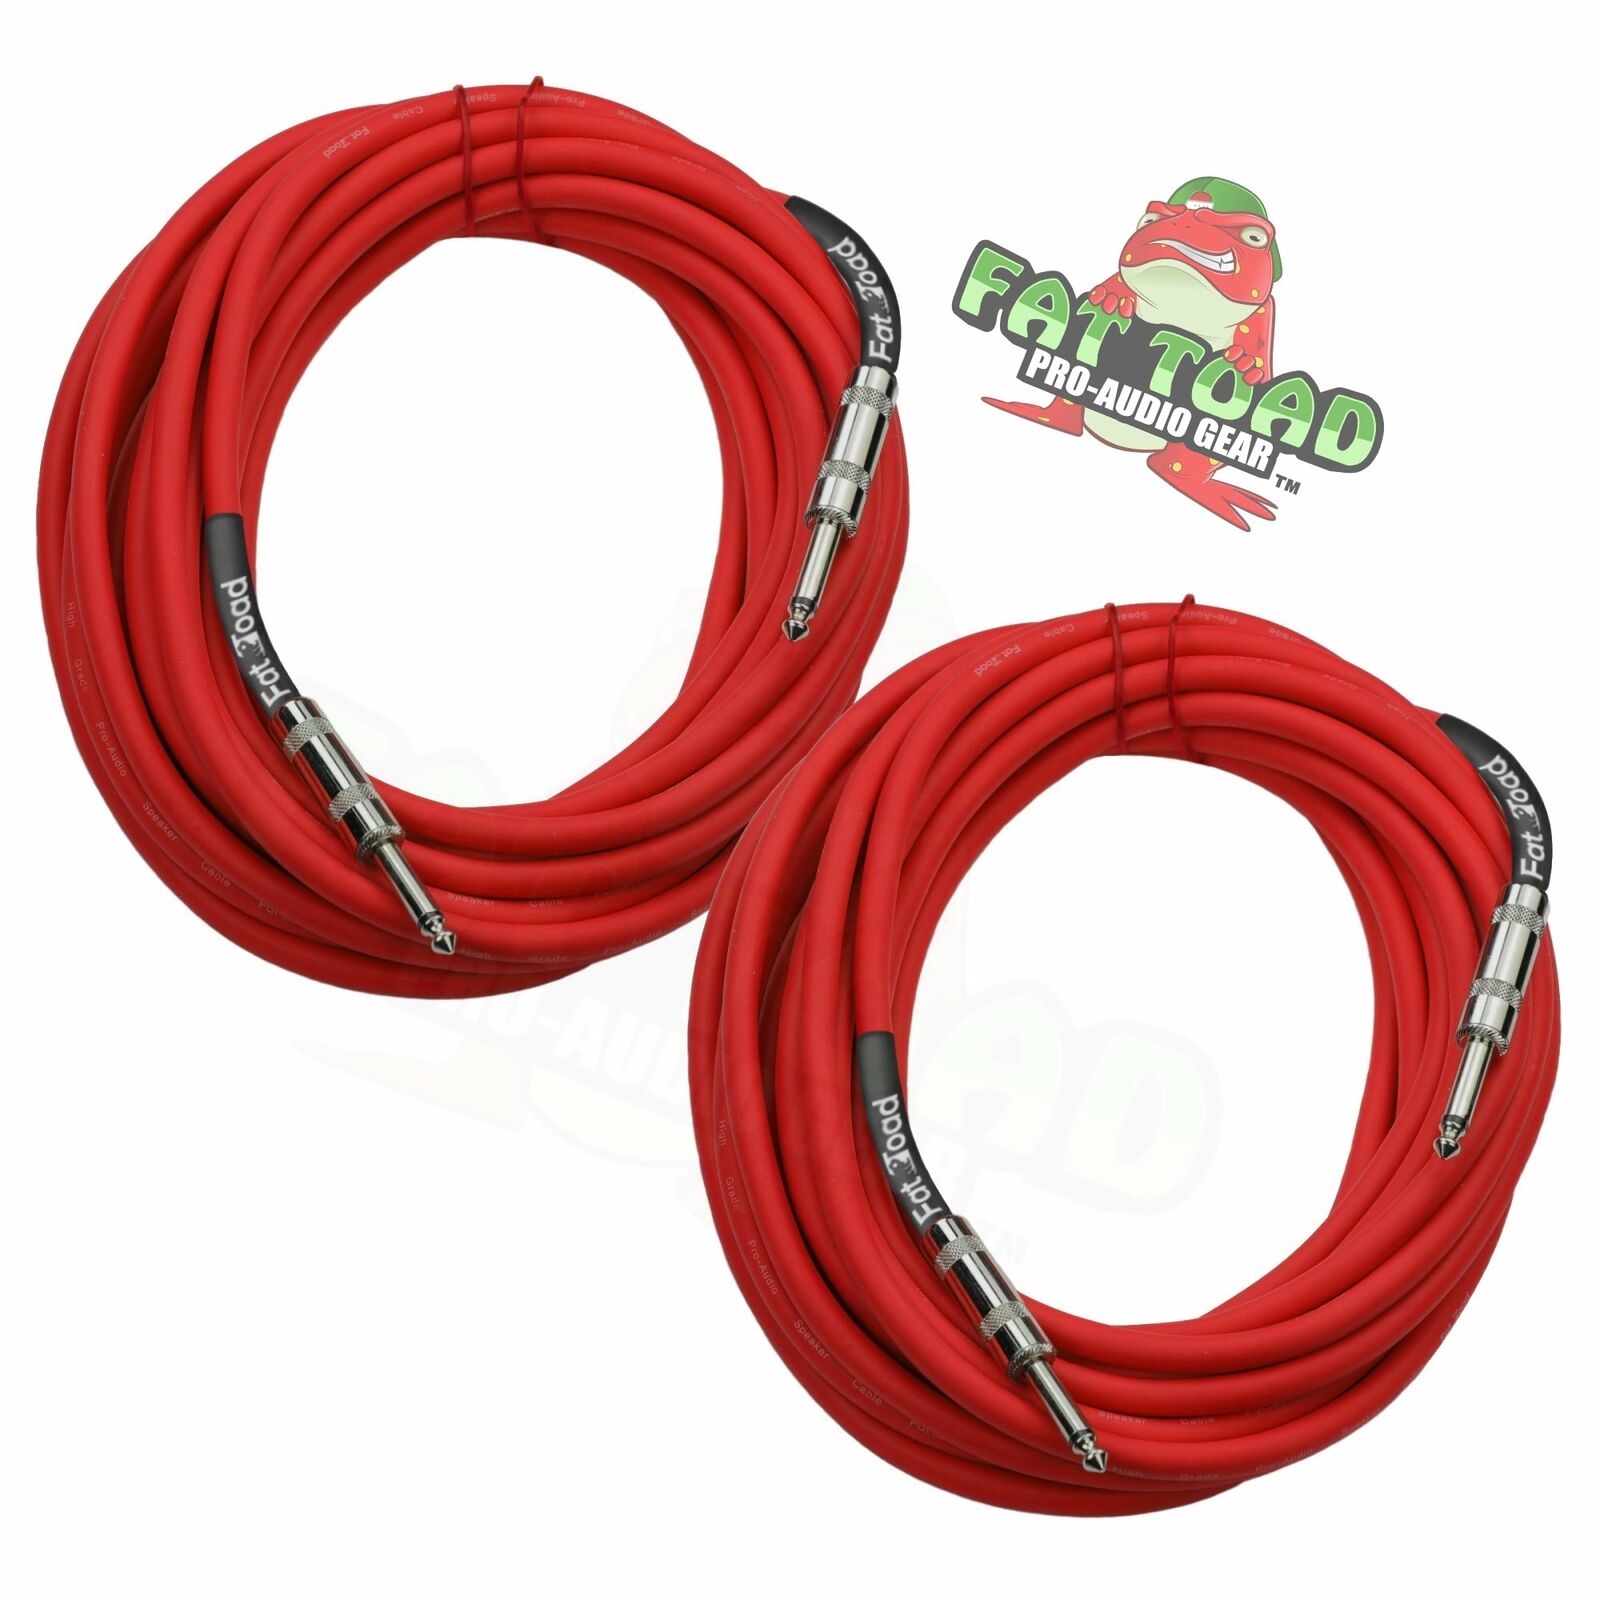 FAT TOAD Speaker Cables ¼ Male Jack 25ft DJ Cords –  PA Audio Stage Studio Wires. Available Now for $29.95